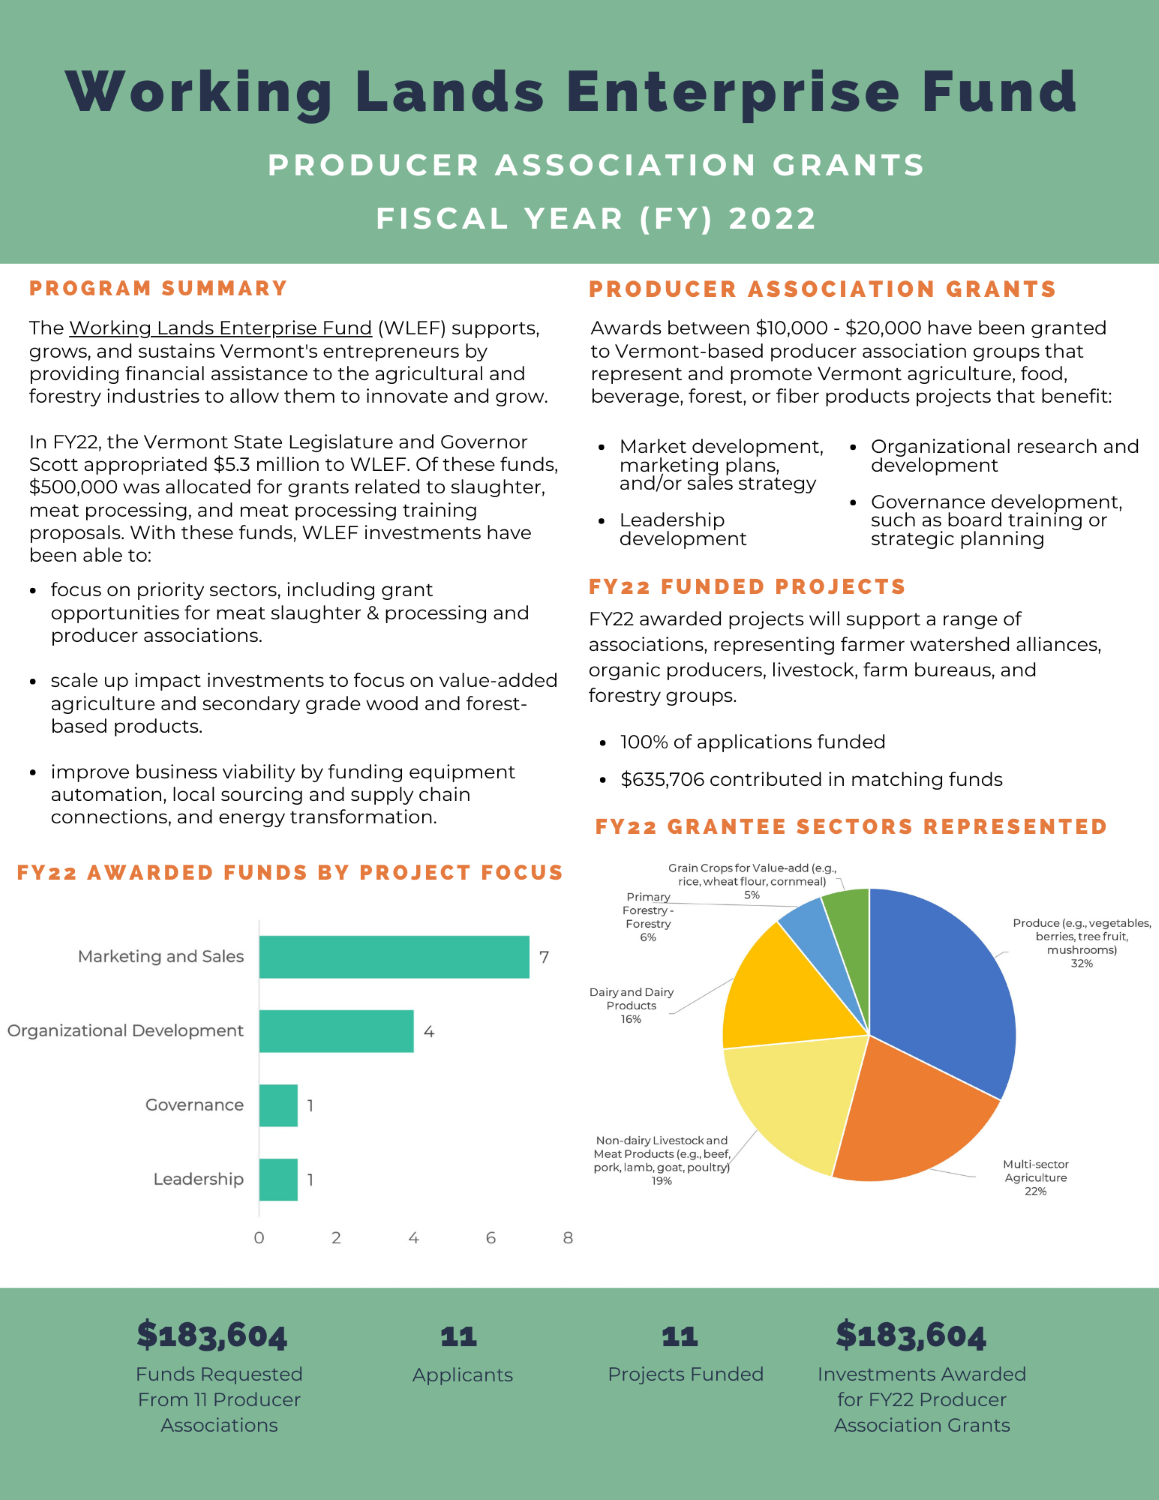 Infographic displaying information about FY22 Producer Association Grants